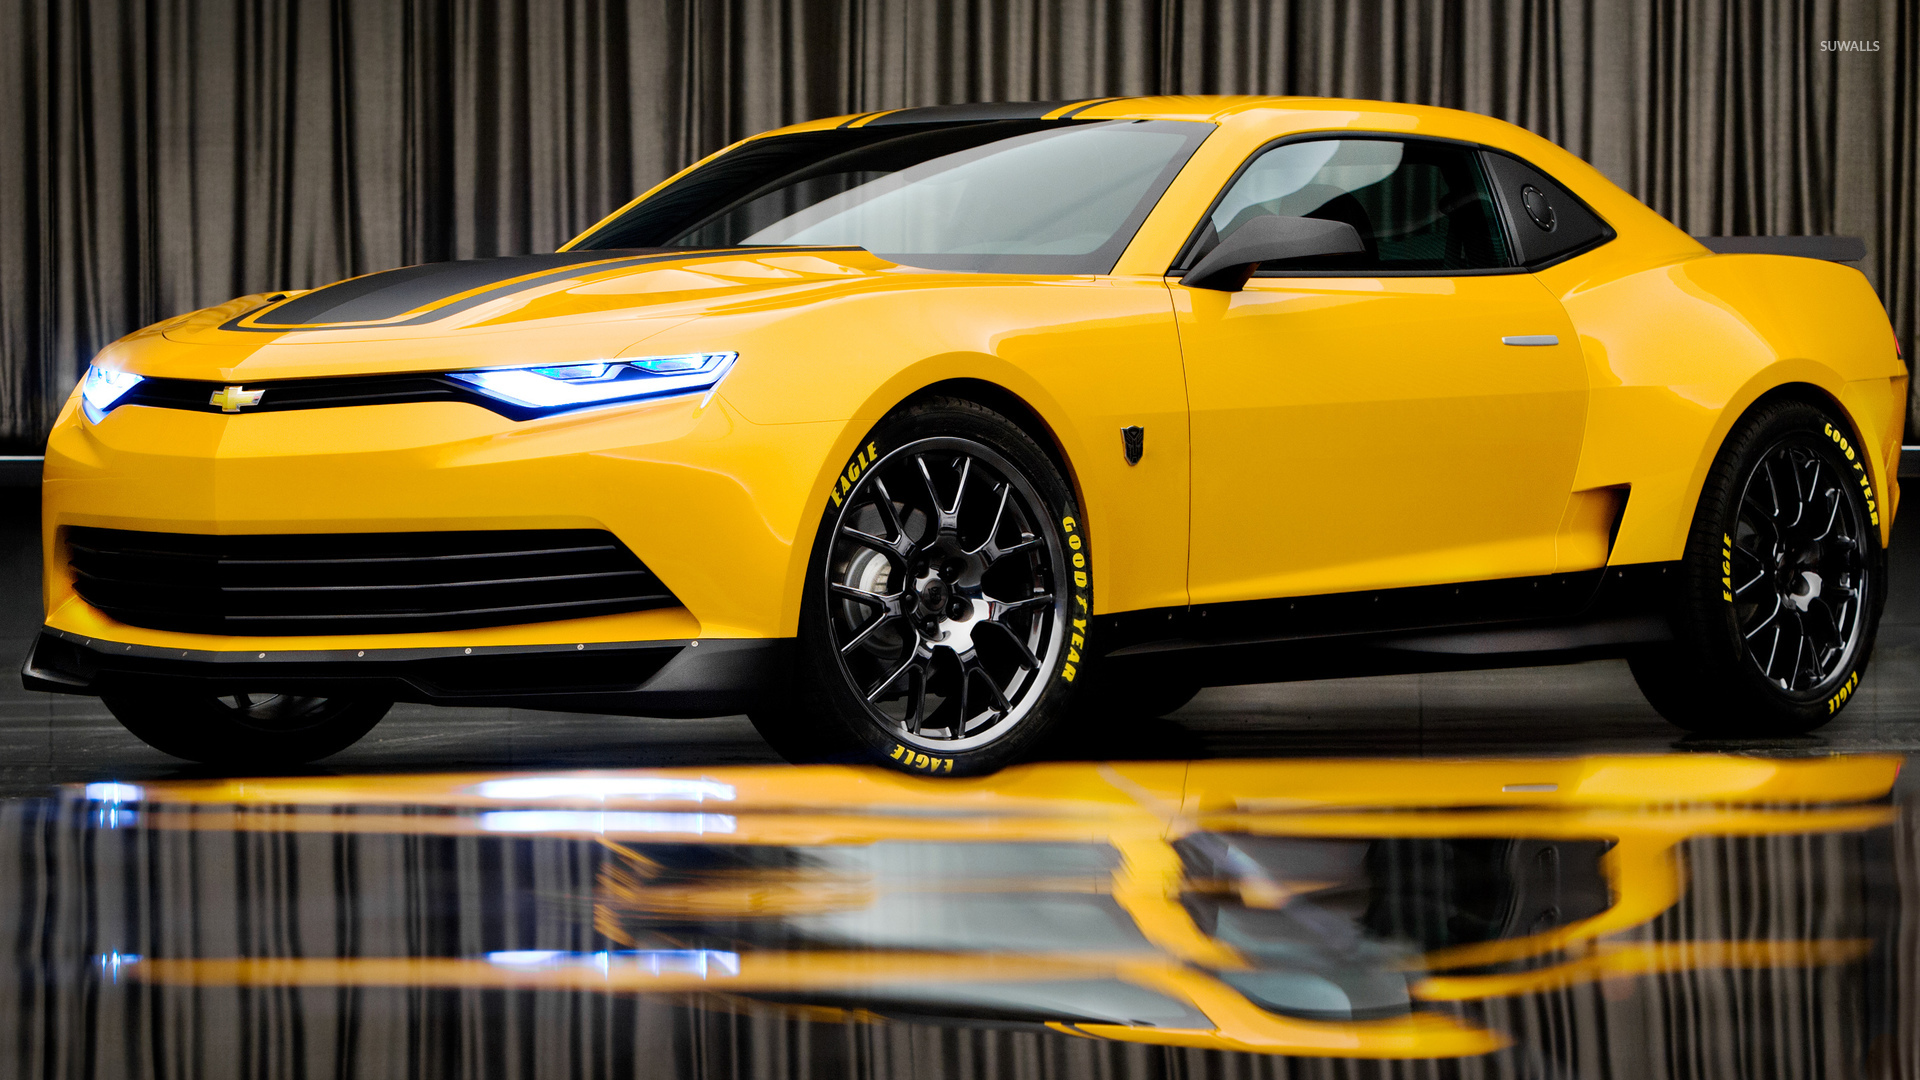 Yellow Chevrolet Camaro with headlights on wallpaper Car wallpapers